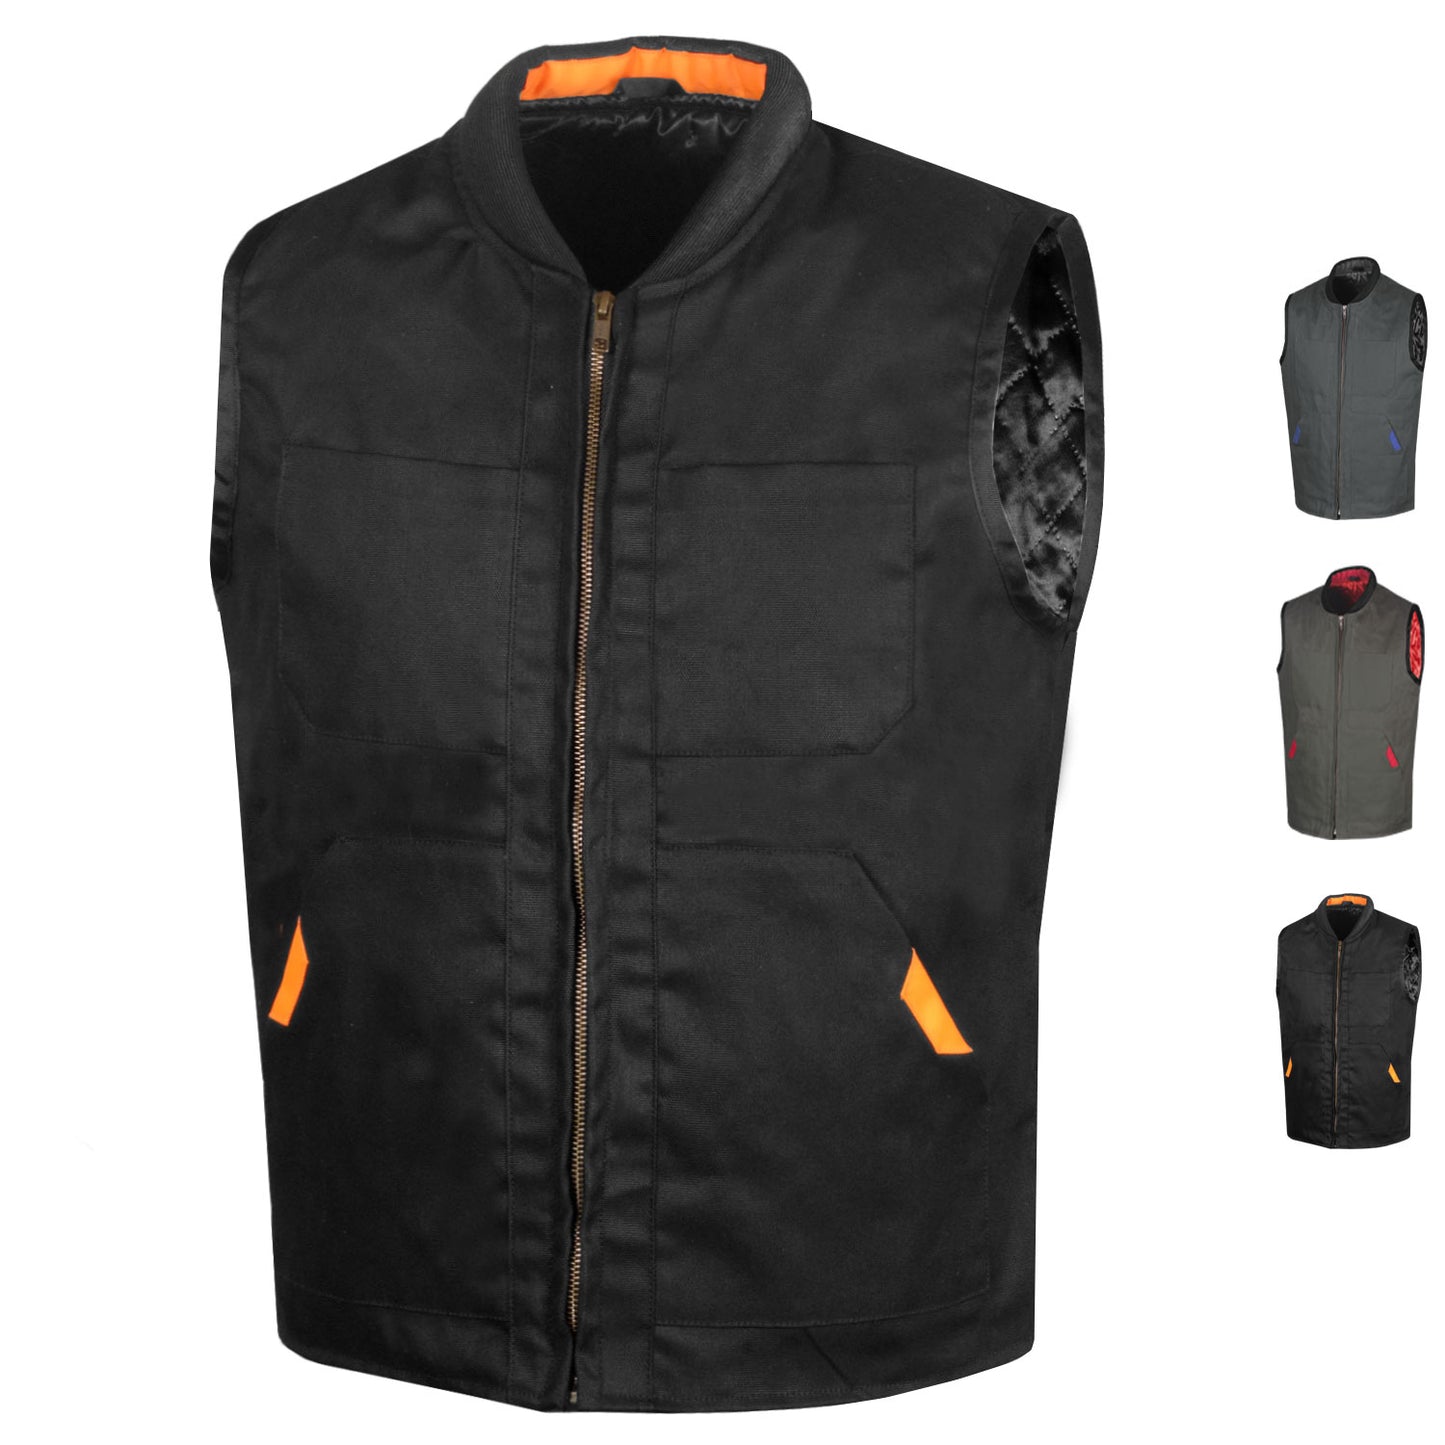 Jackets 4 Bikes Men's Dual Holsters Rugged Vest Concealed Carry Inside Pockets For Hunting Fishing Motorcycle and Outdoors Black